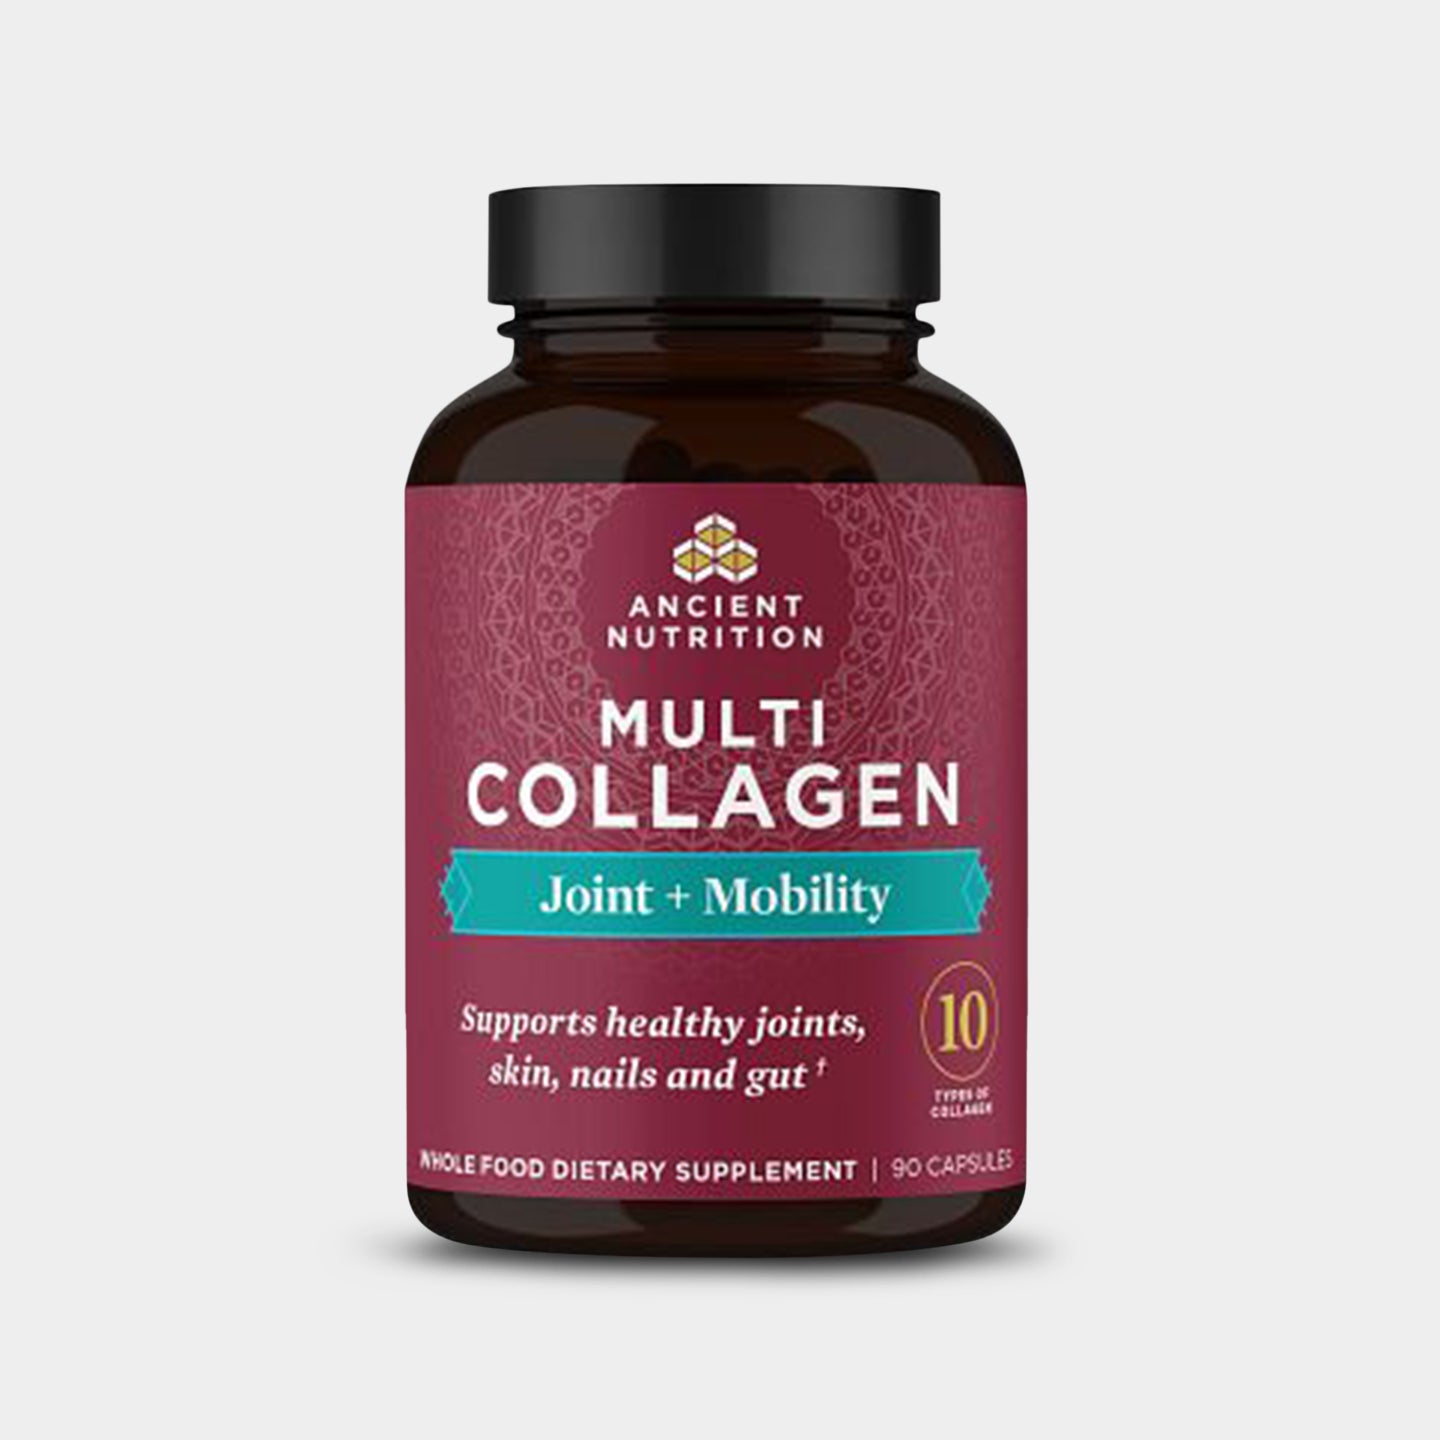 Ancient Nutrition Multi Collagen - Joint + Mobility, Unflavored, 90 Capsules A1